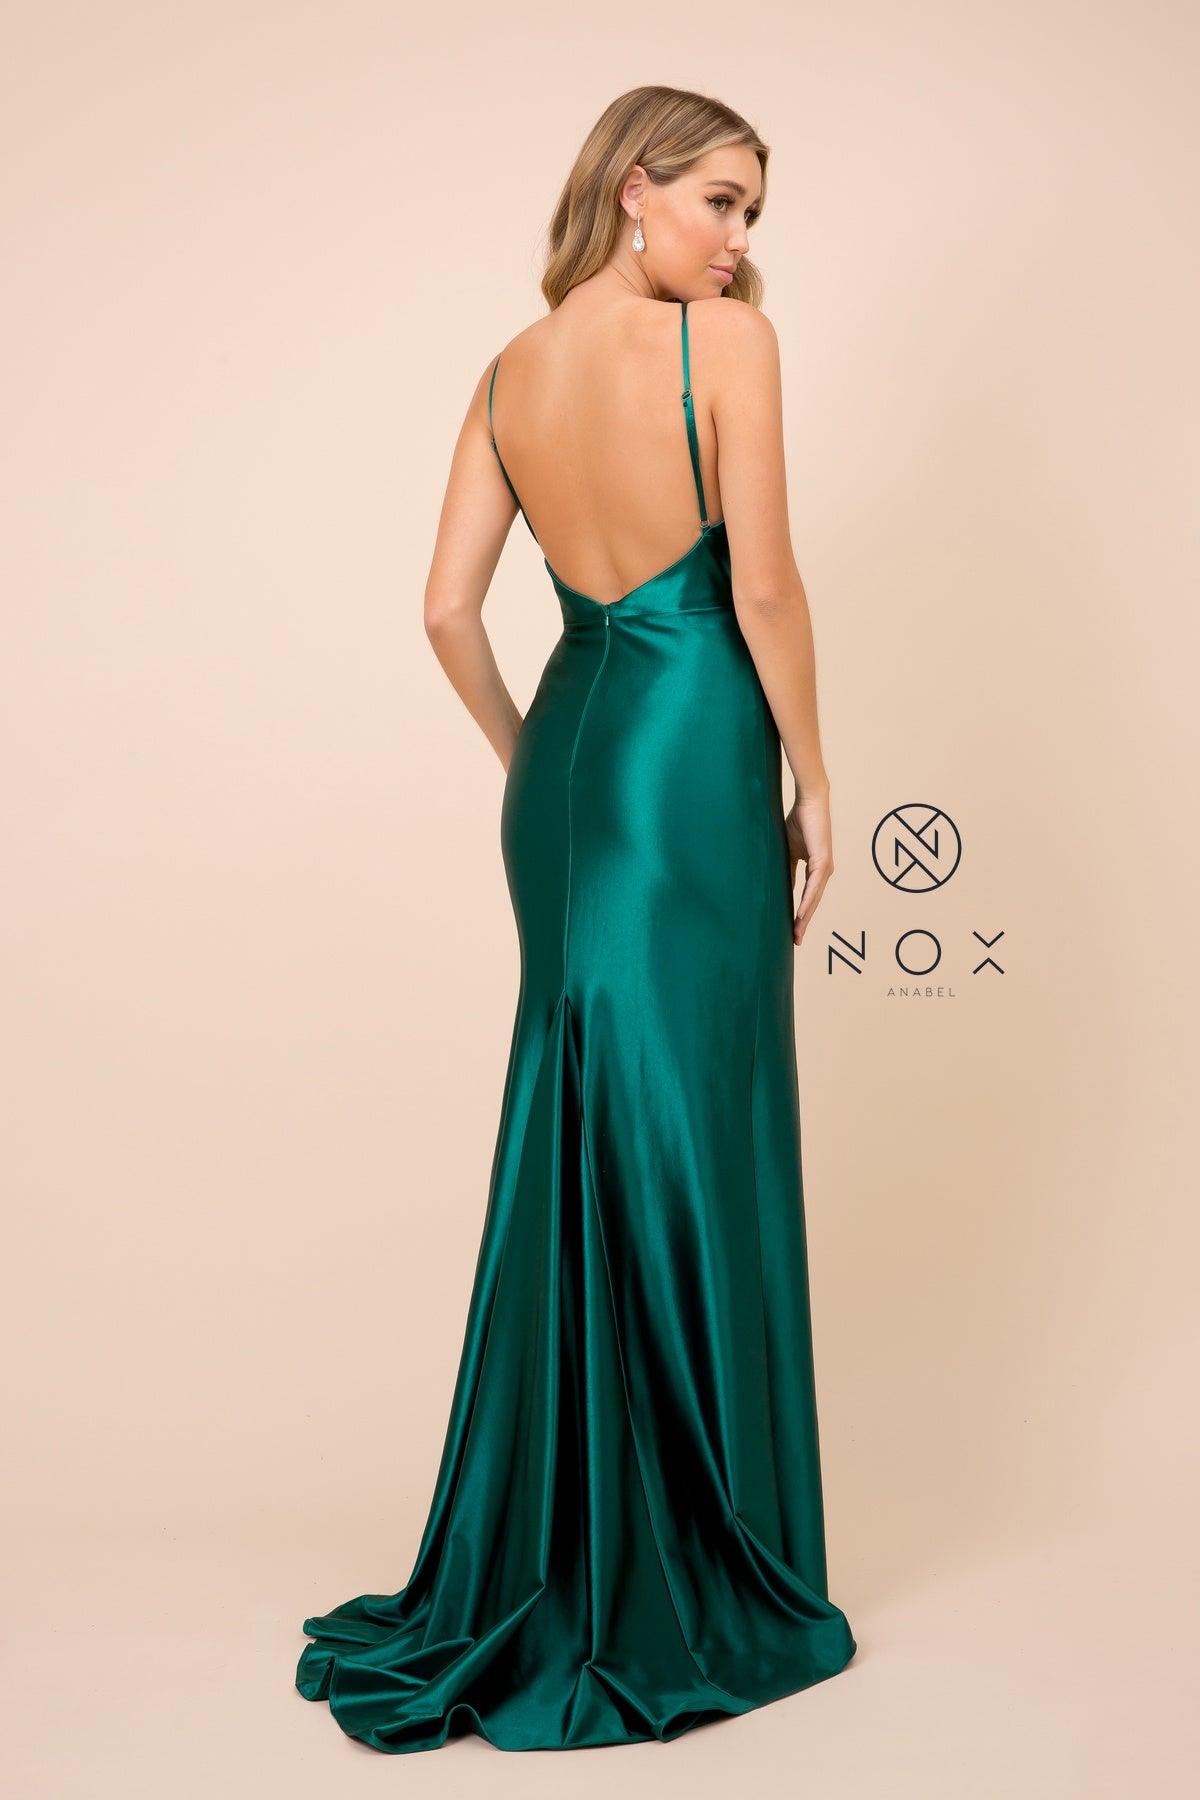 Long Sexy Satin High Slit Prom Dress Evening Gown - The Dress Outlet Nox Anabel